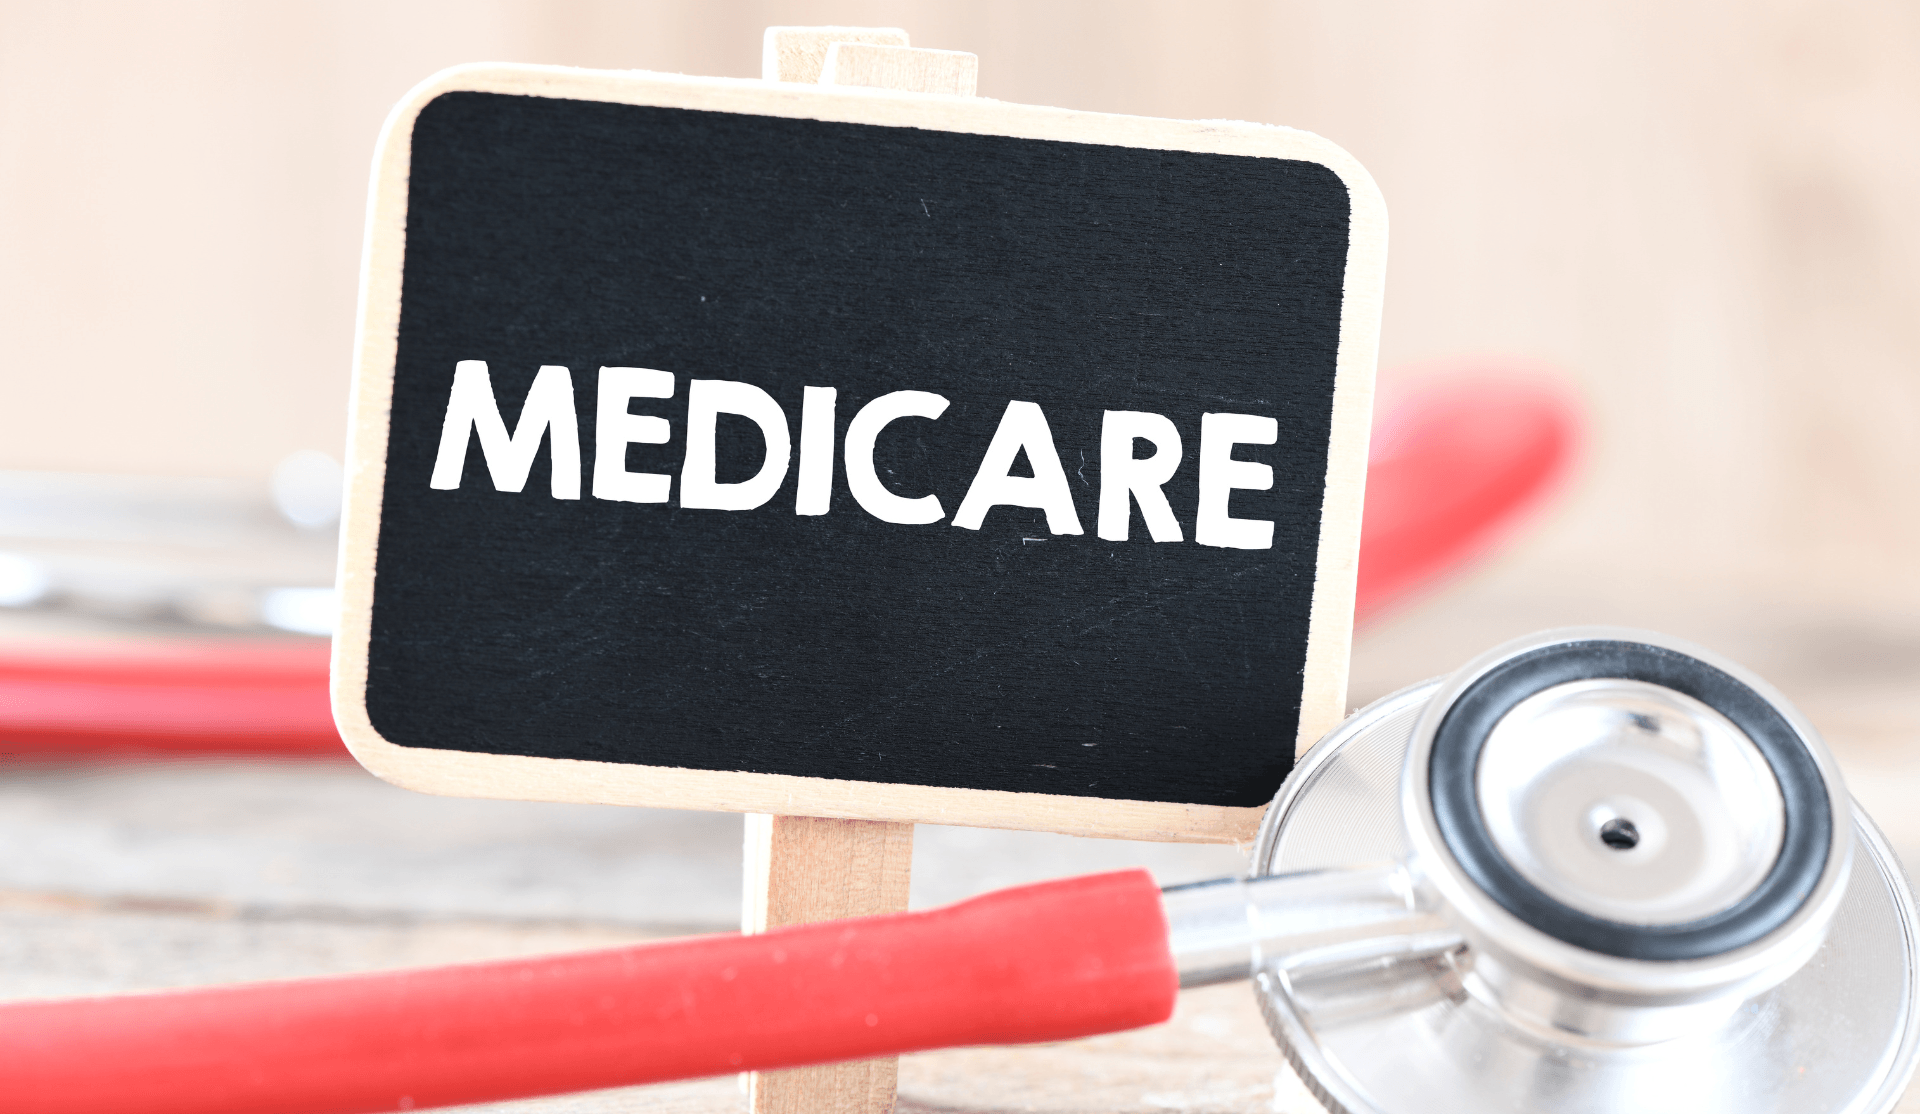 Medicare overview